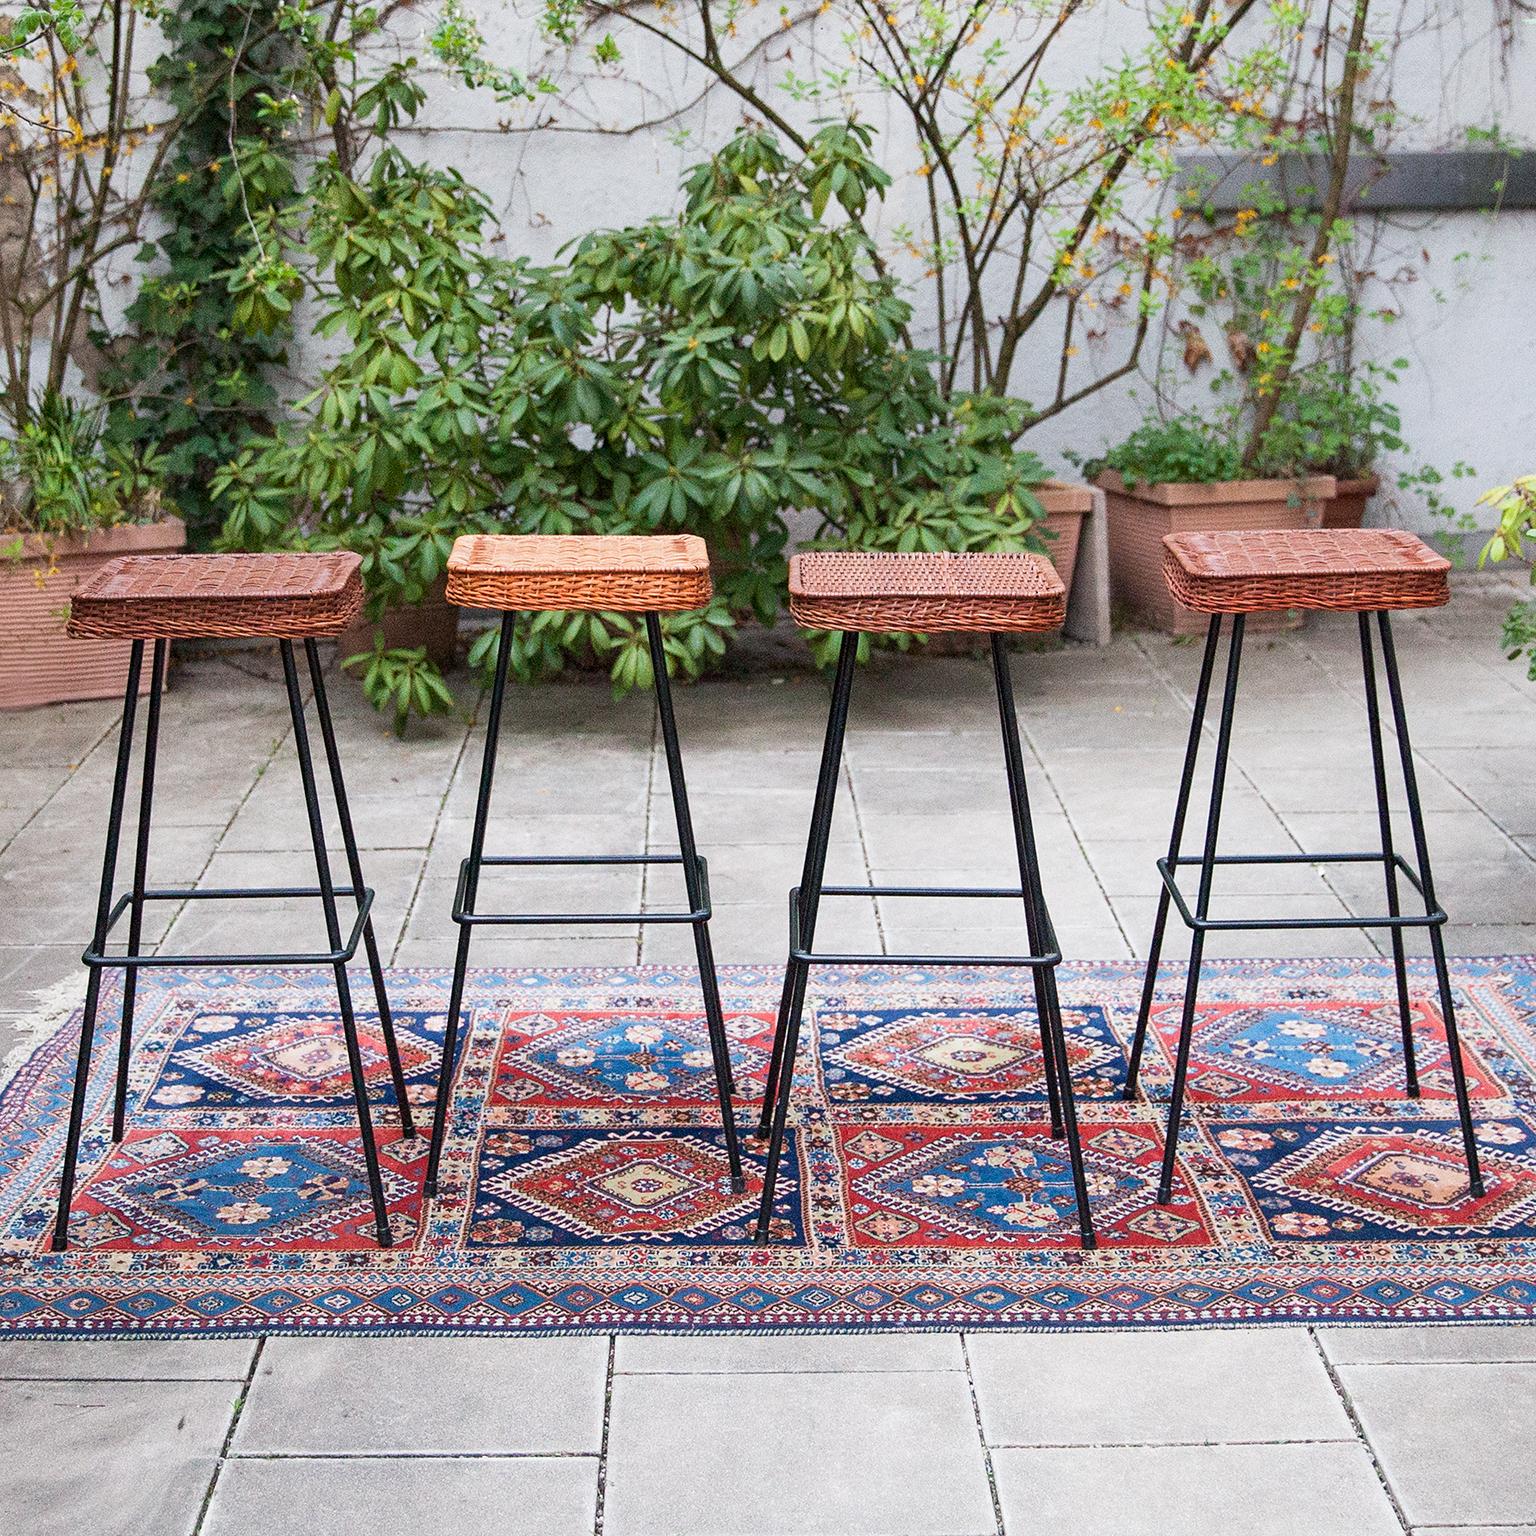 Set of six bar stools designed by Herta Maria Witzemann and manufactured by Erwin Behr in 1950. The work of Witzemann typically consists out of light and vibrant structures, which have a feeling of lightness to it and woven cane was often used as a